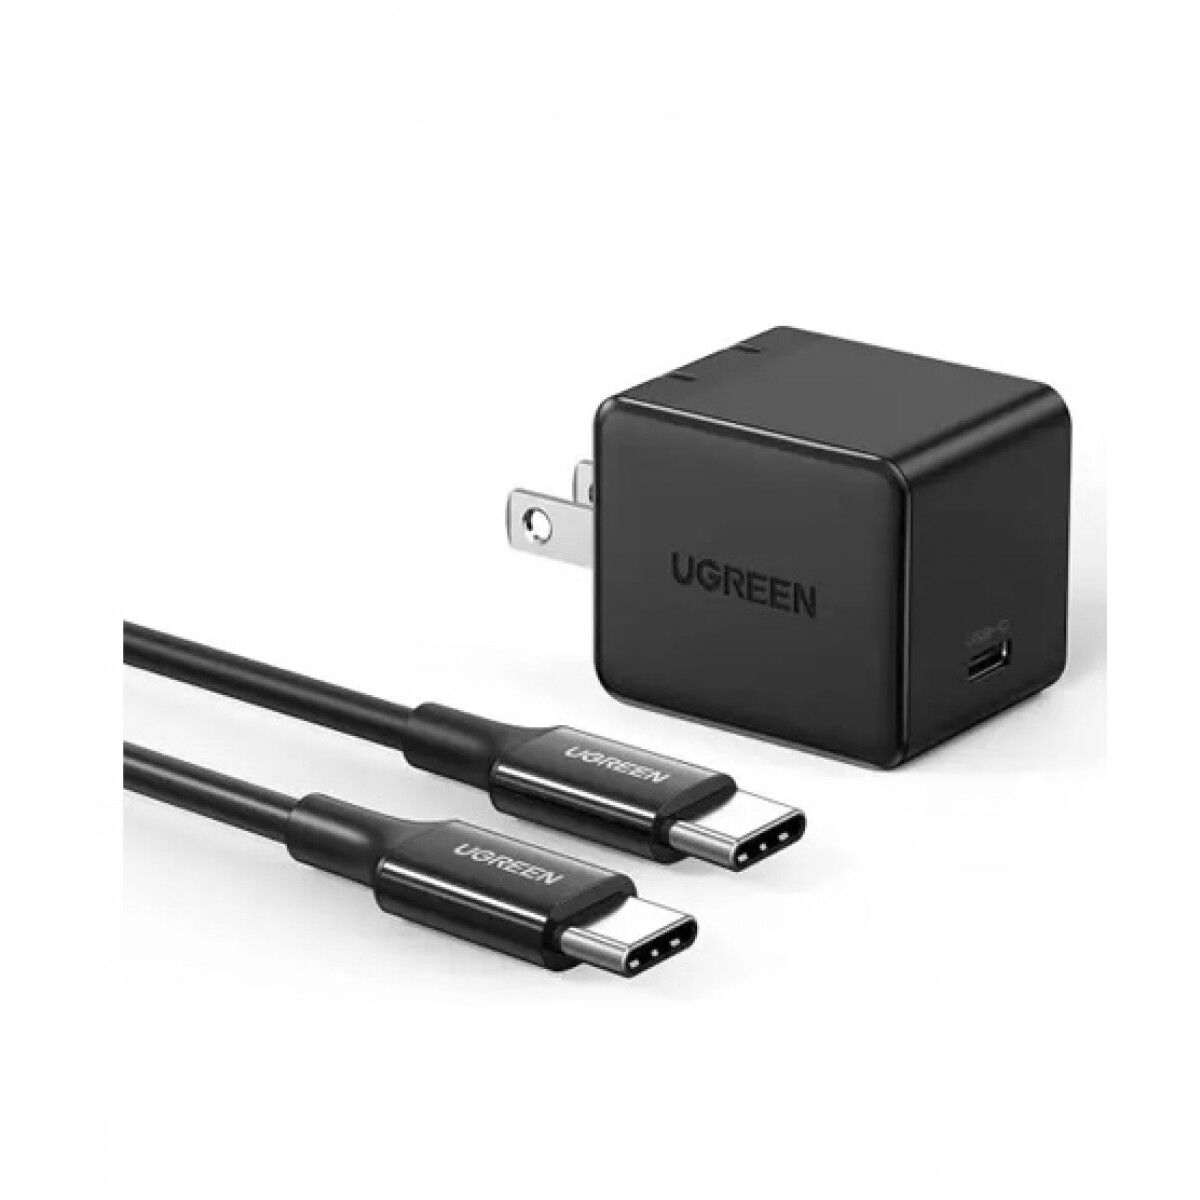 UGreen 50576 25W USB C Charger PD Port Price in Pakistan